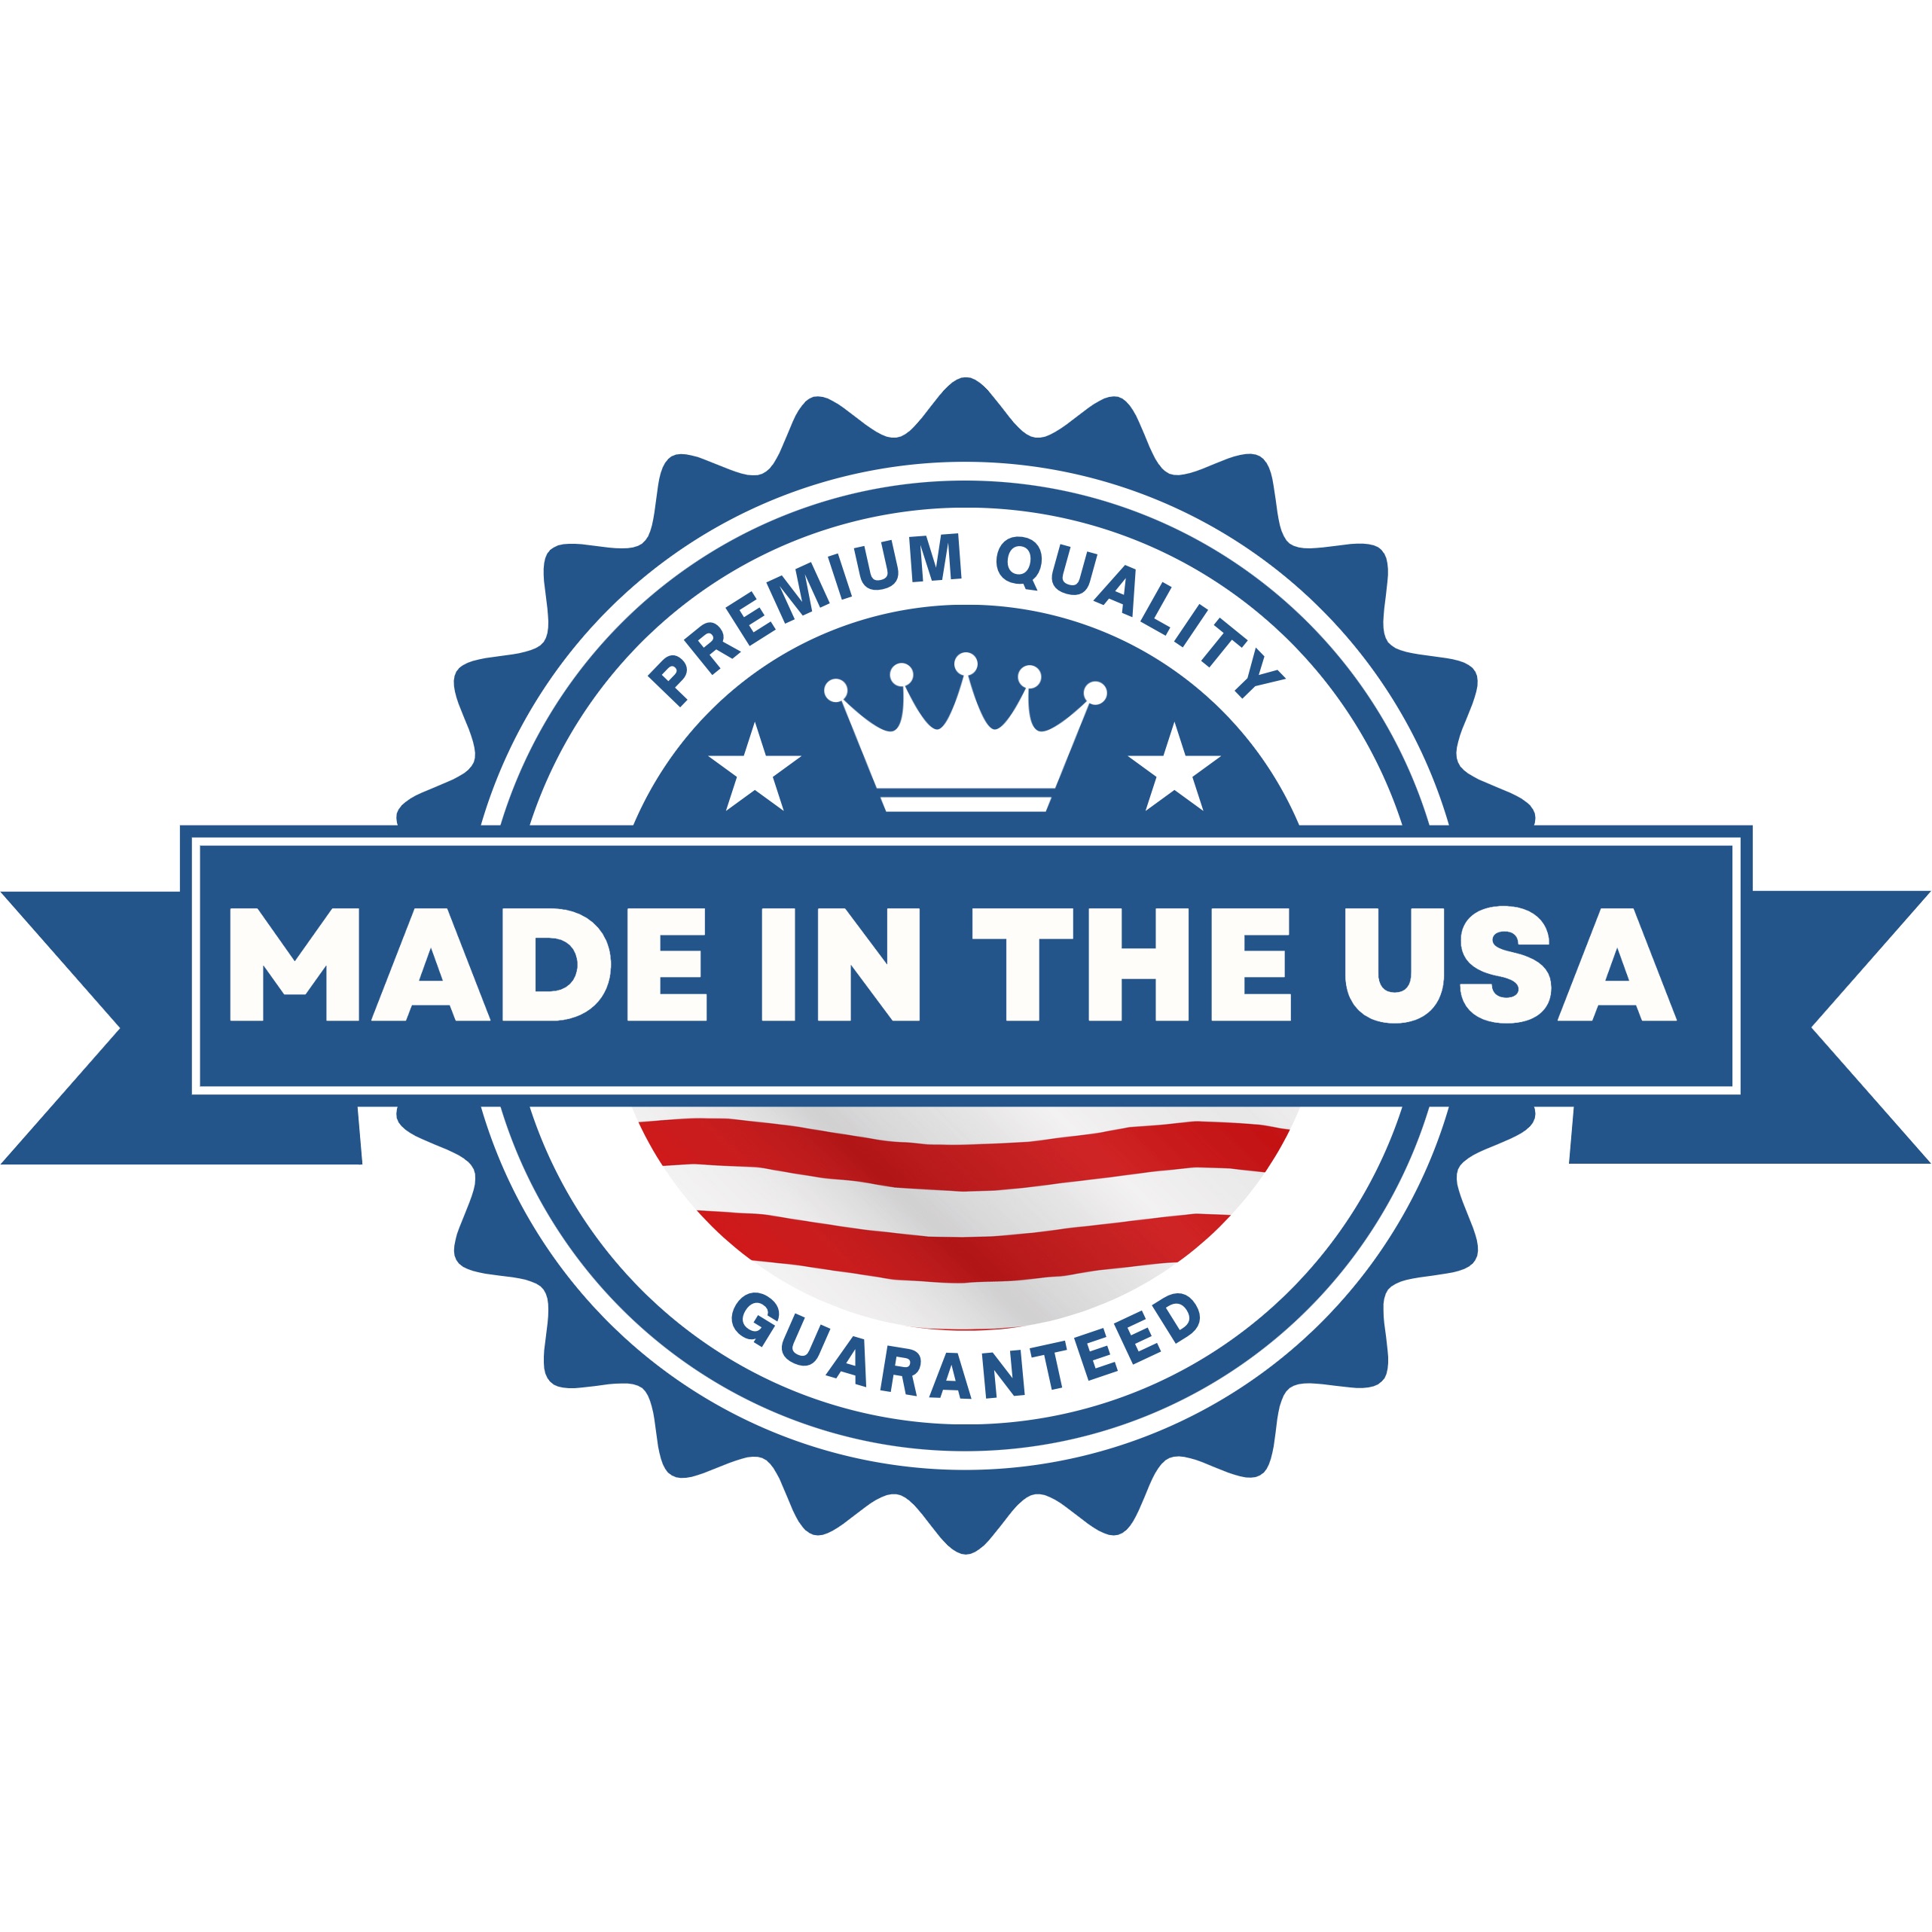 Made in the USA' logo prominently displayed, representing Cambia-distribution's commitment to offering products that are manufactured in the United States. The logo features the American flag and bold text, emphasizing the company's dedication to supporting local industries and ensuring product quality and authenticity.